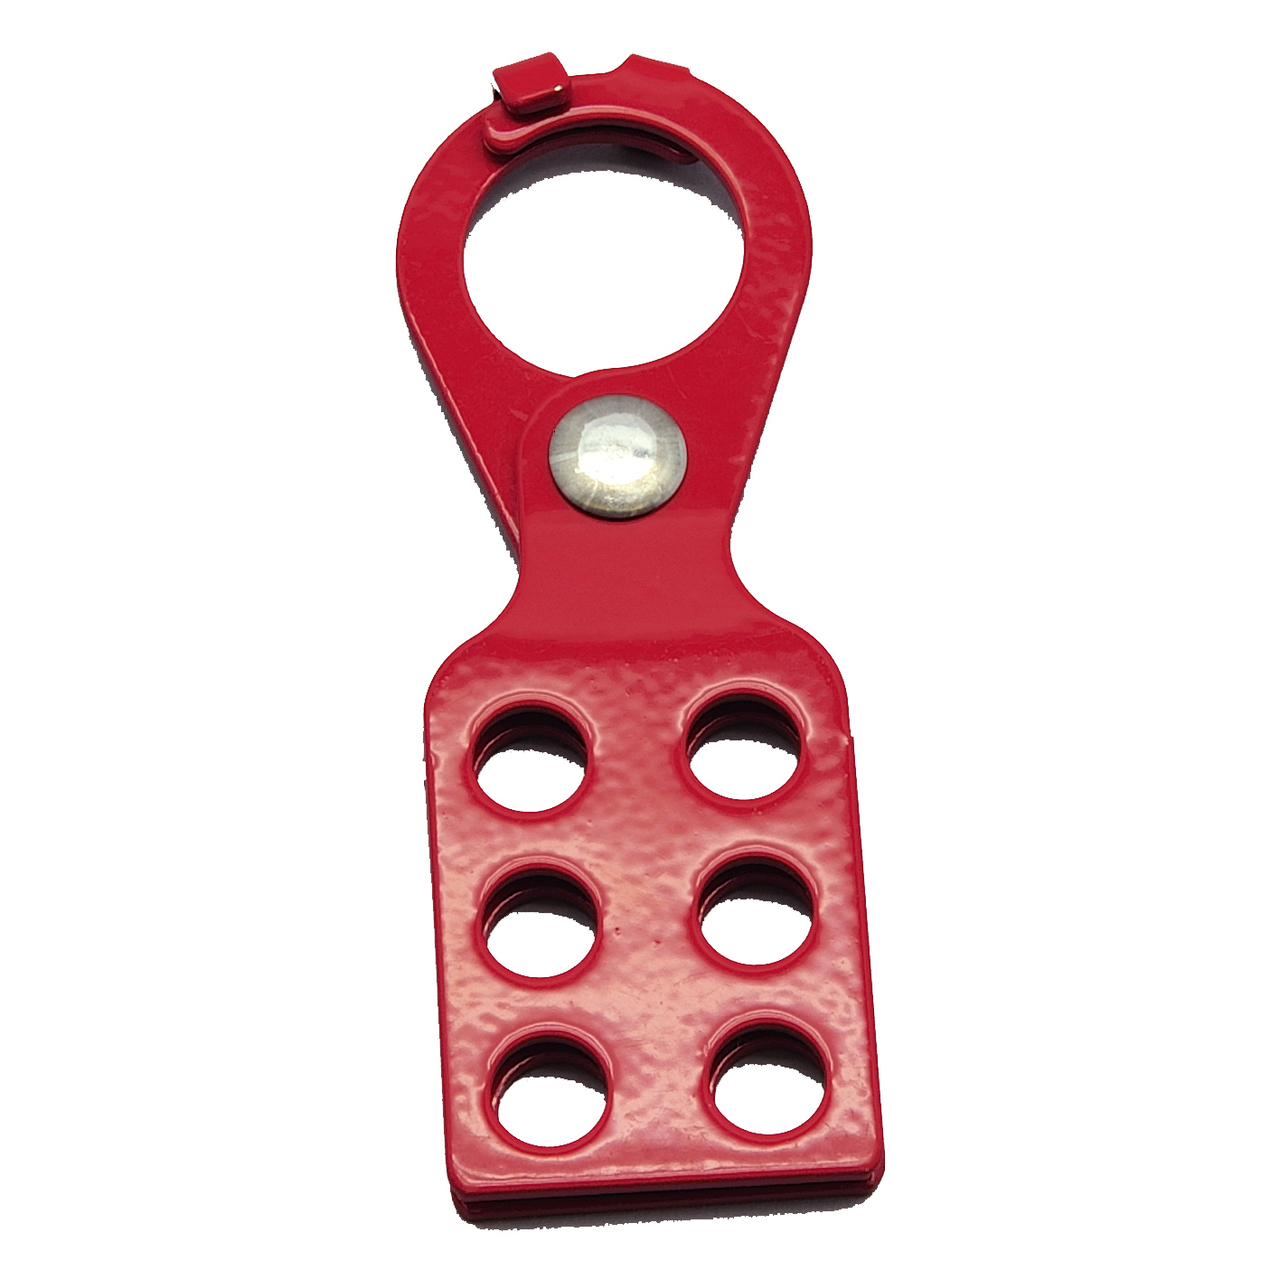 ZING RecycLockout Lockout Tagout Hasp, 1 Inch Steel with Tabs